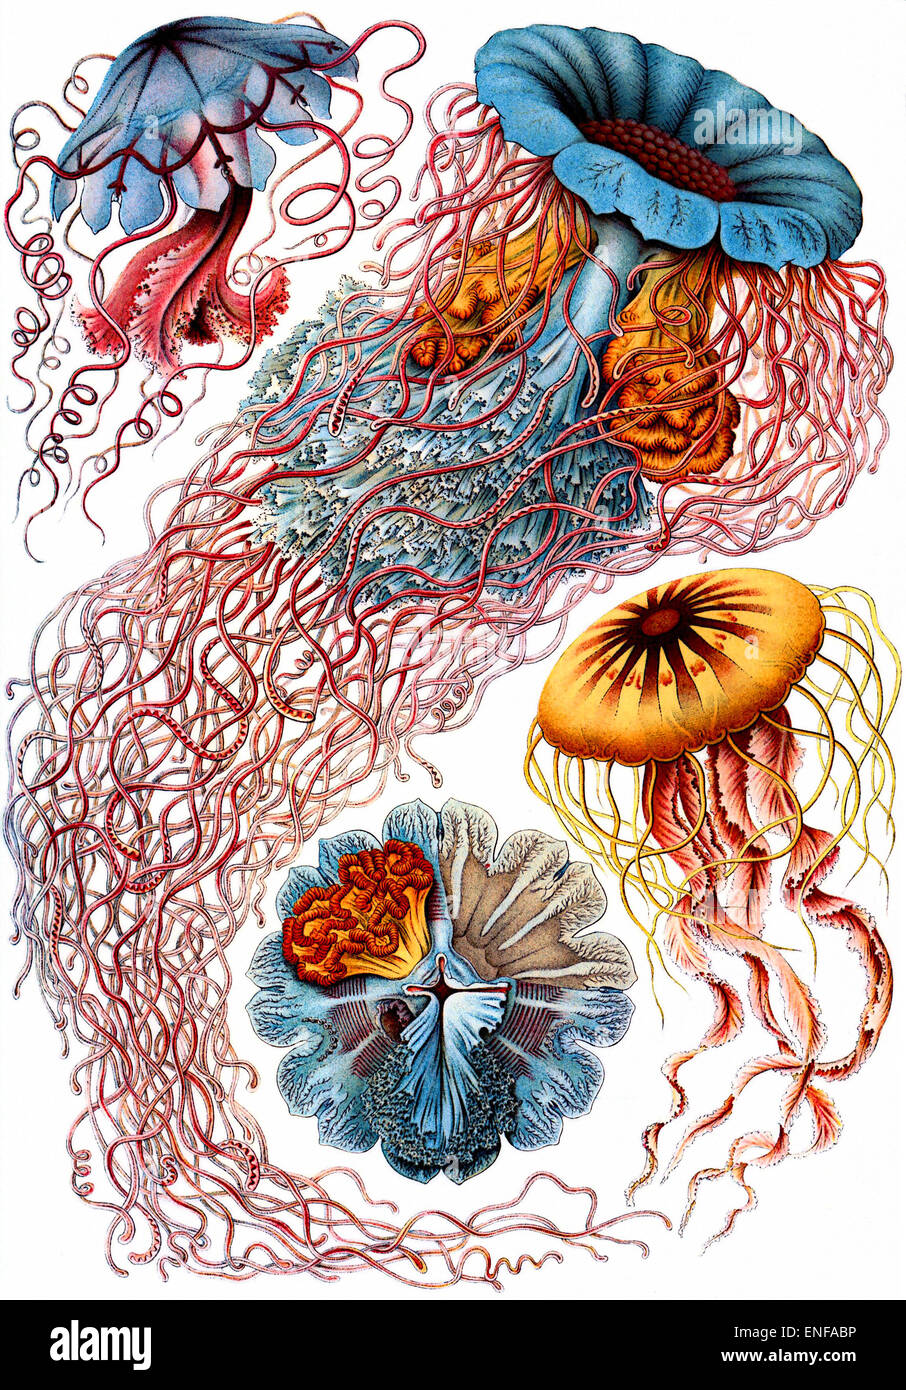 Discomedusae (Jellyfish), by Ernst Haeckel, 1904 - Editorial use only. Stock Photo